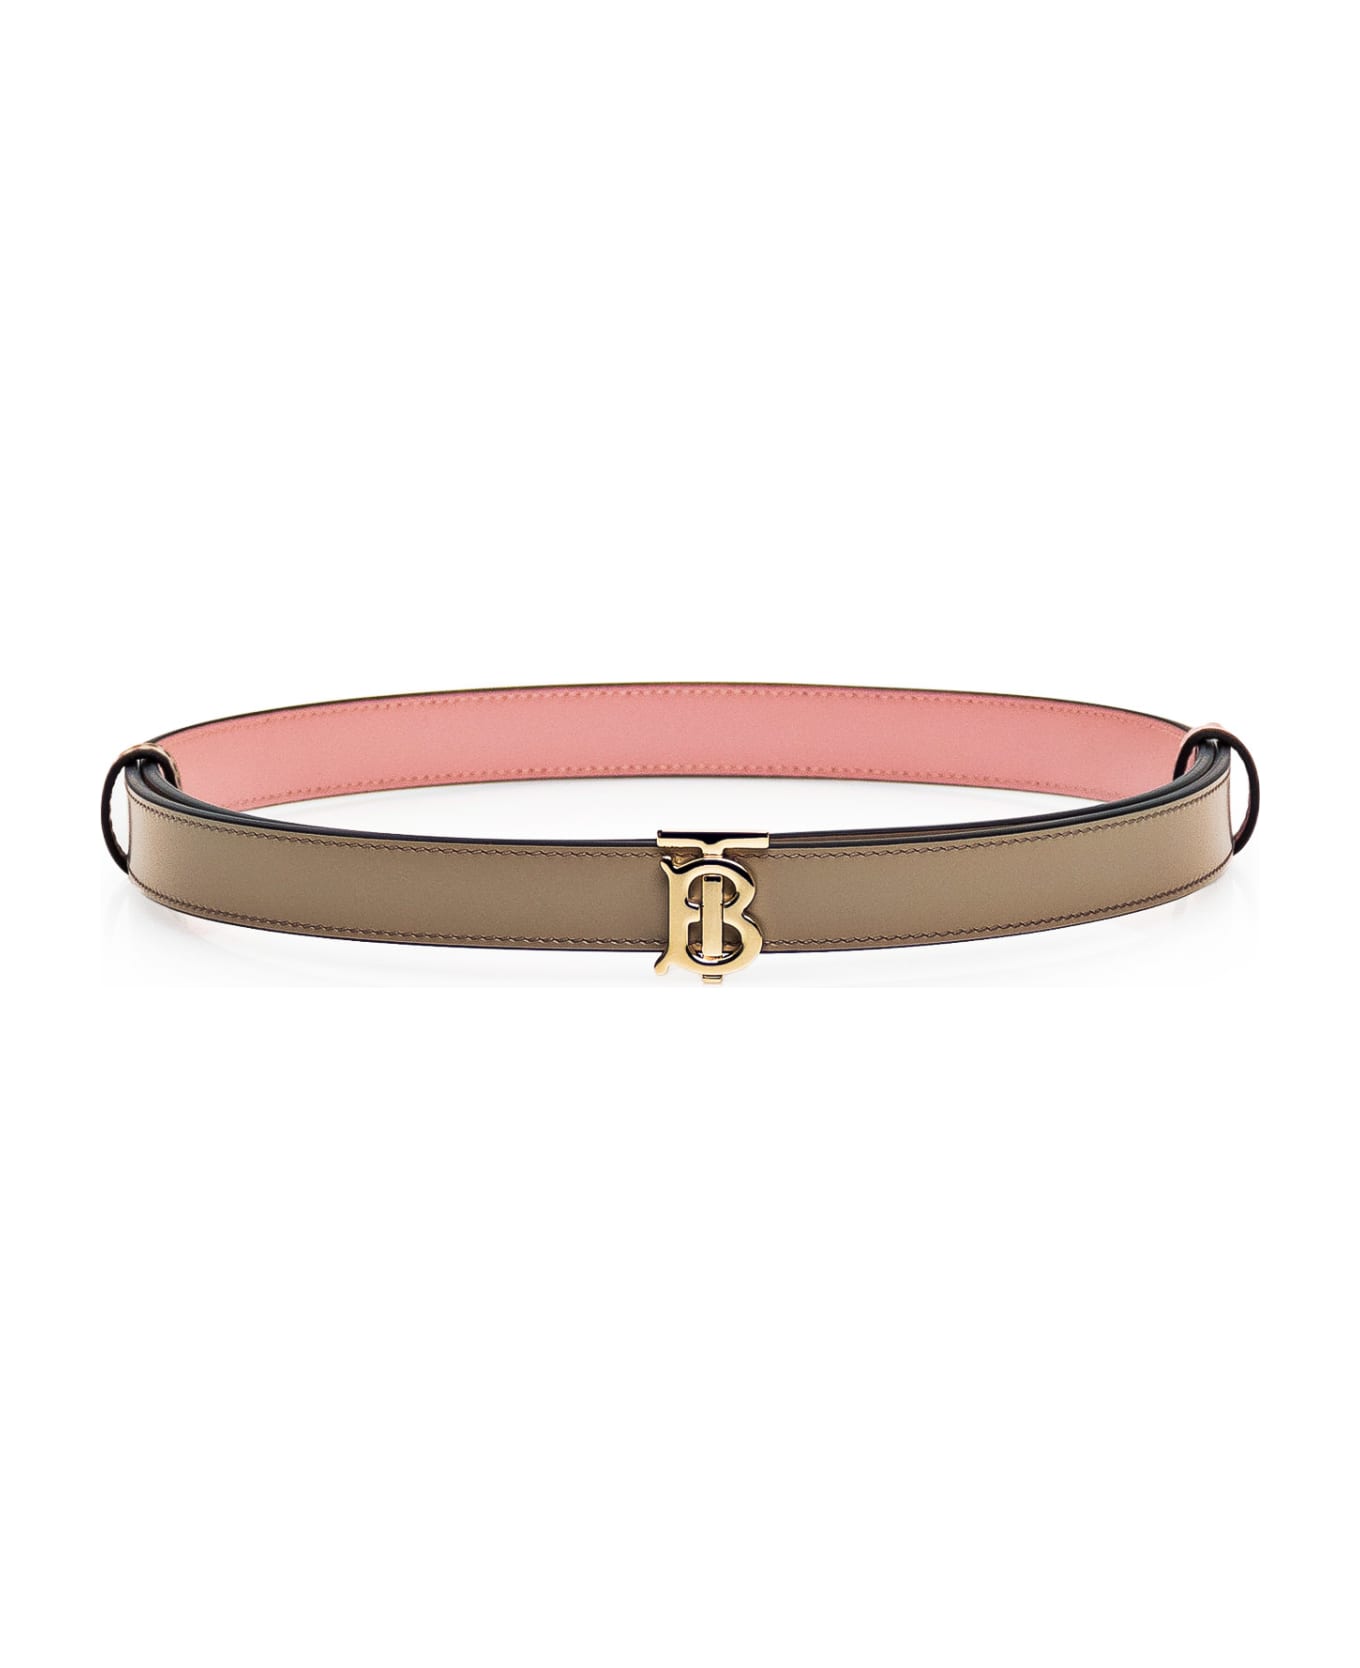 Burberry Reversible Leather Belt - A1435